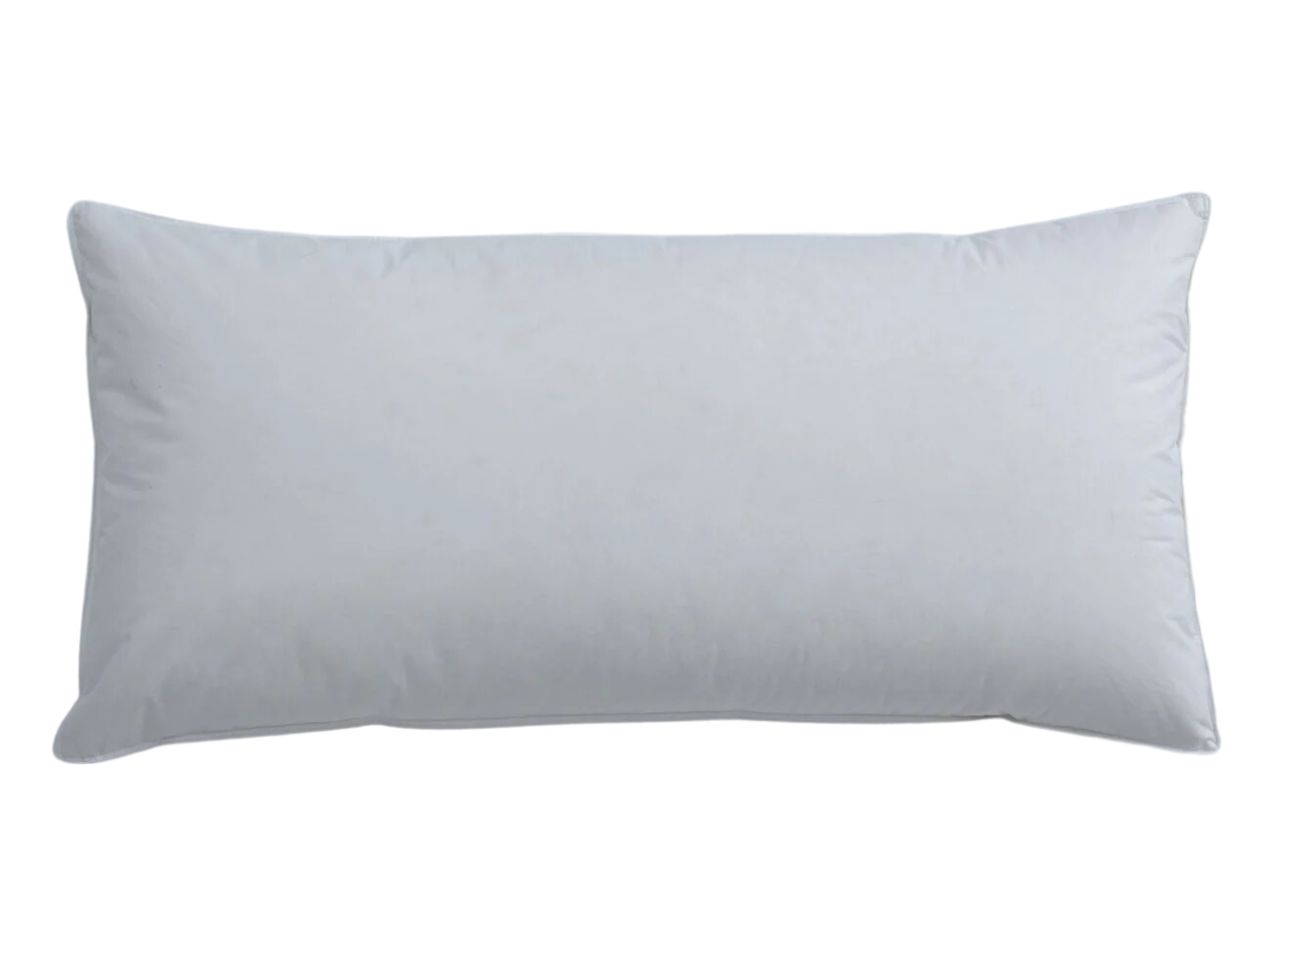 Luxe Dreams special 3-chamber down pillow 40 x 80 cm | B-goods